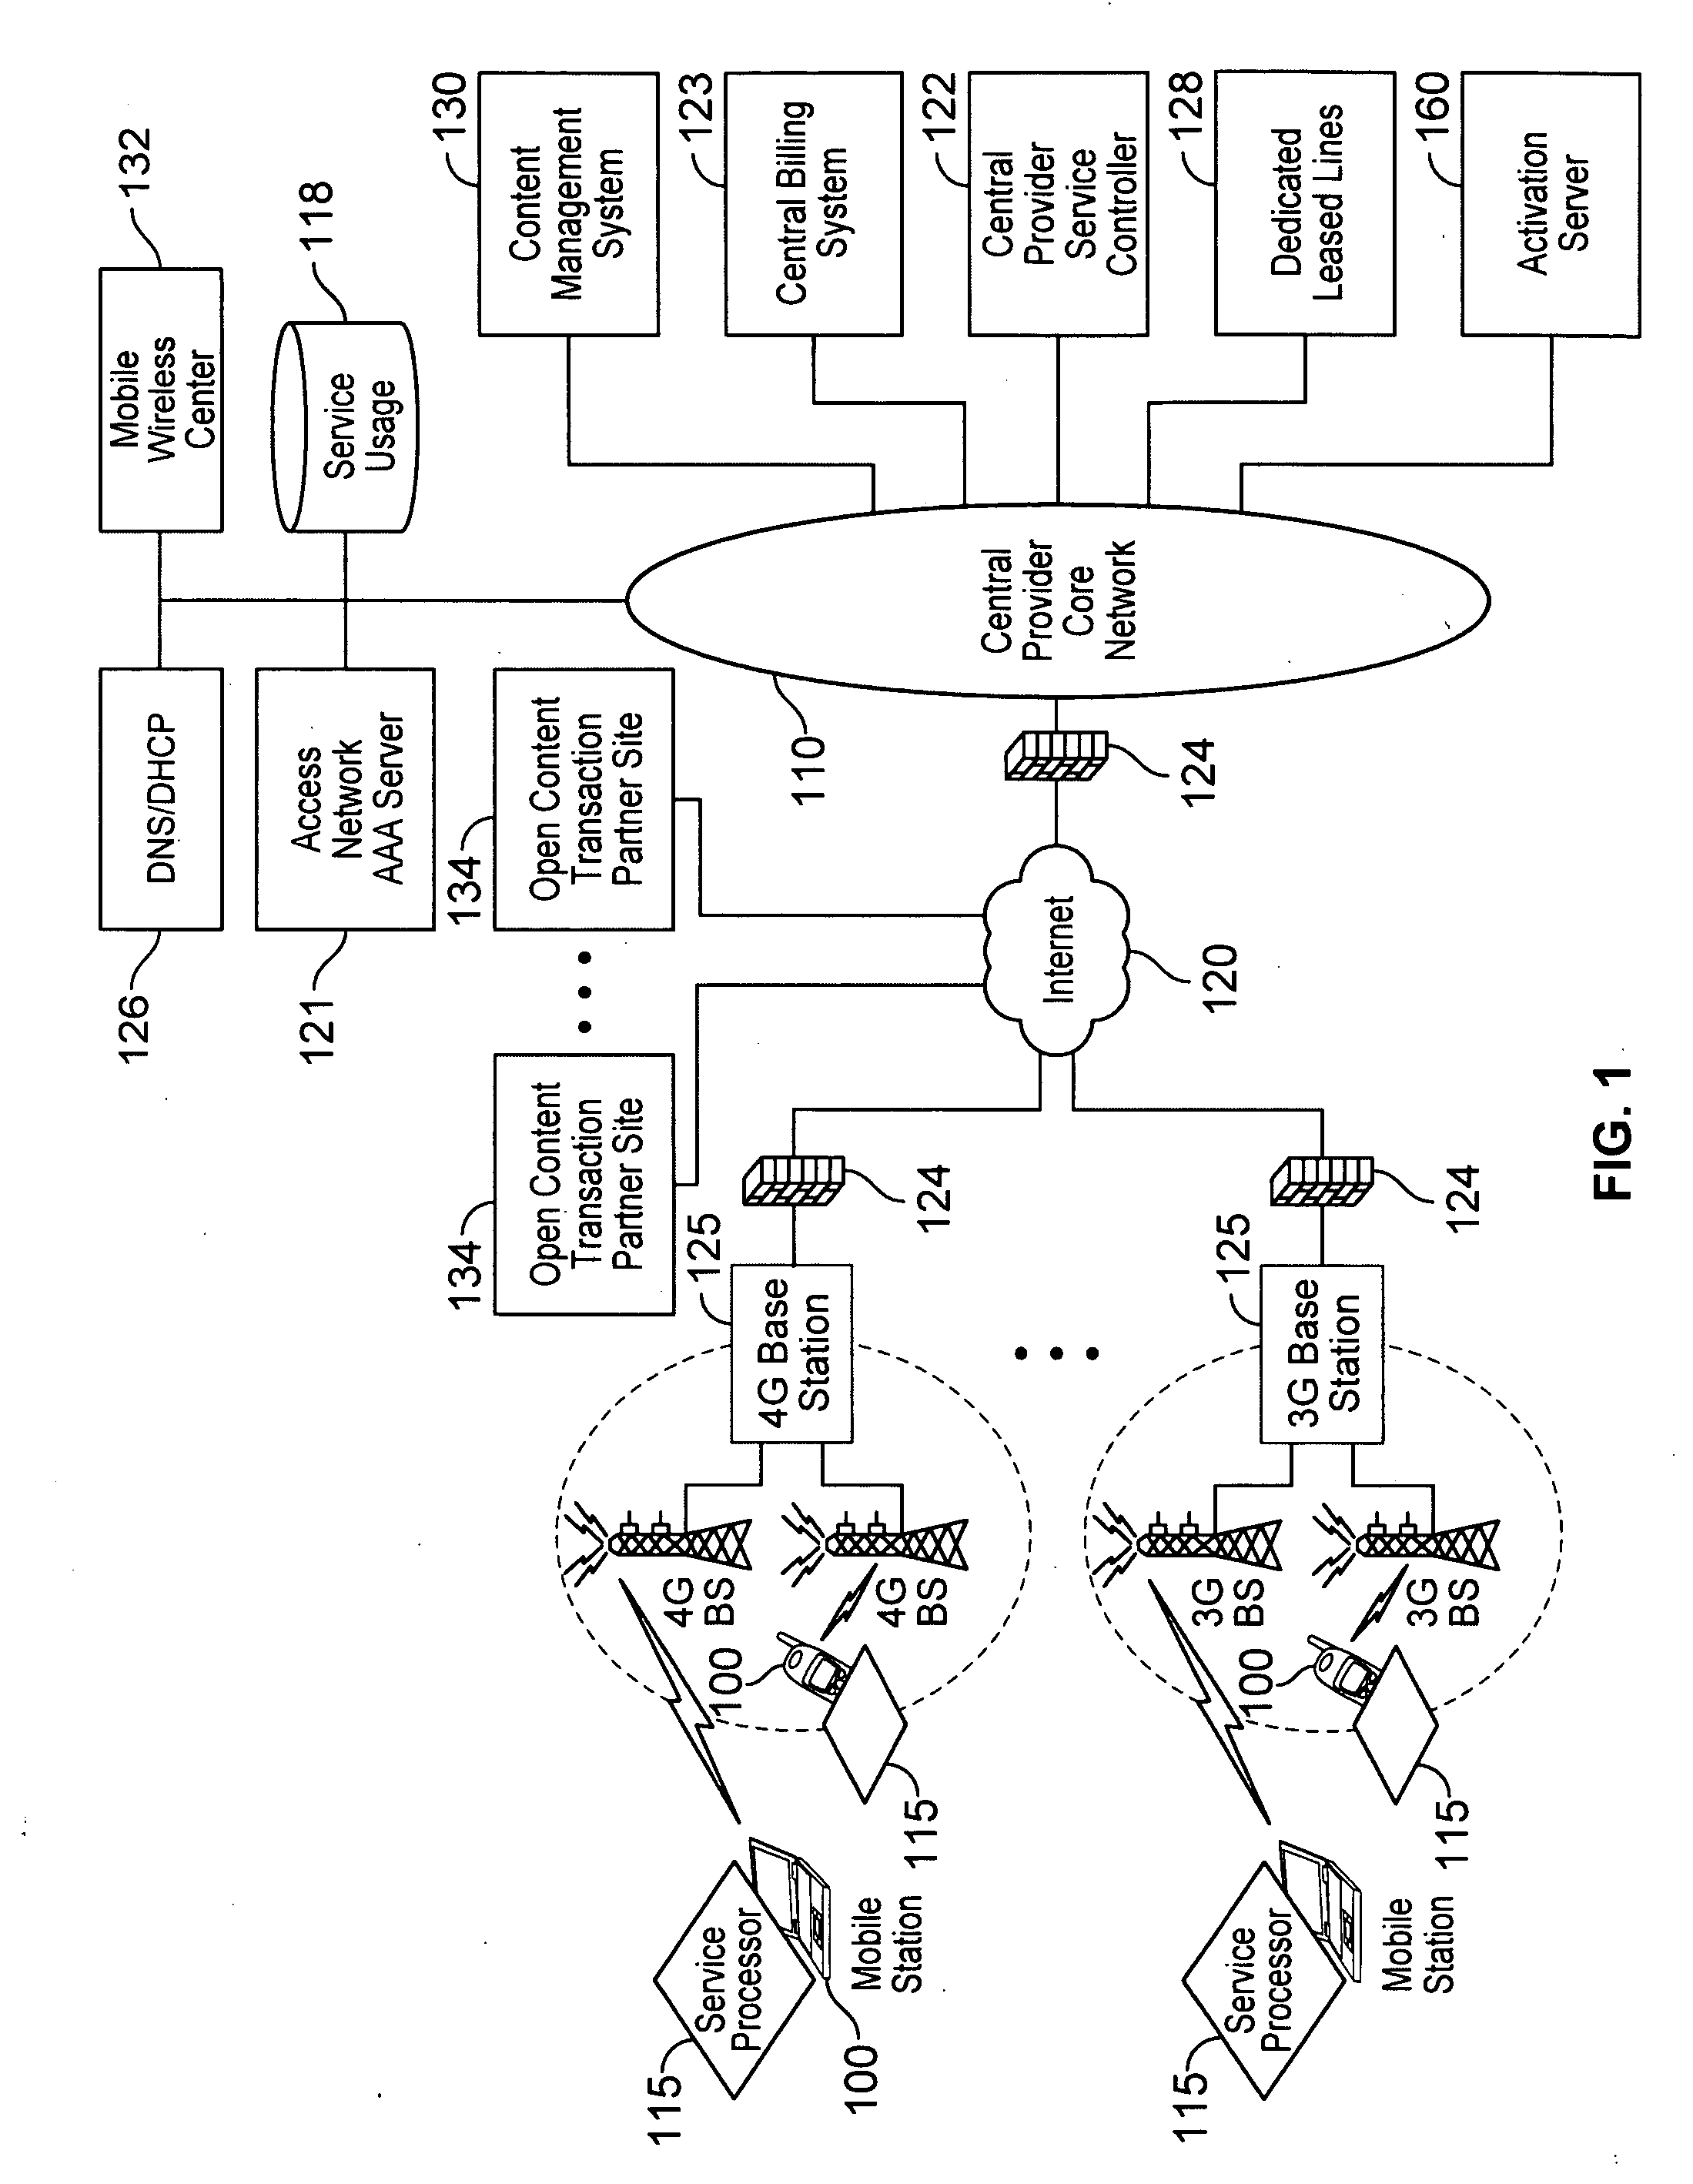 Network based service profile management with user preference, adaptive policy, network neutrality, and user privacy